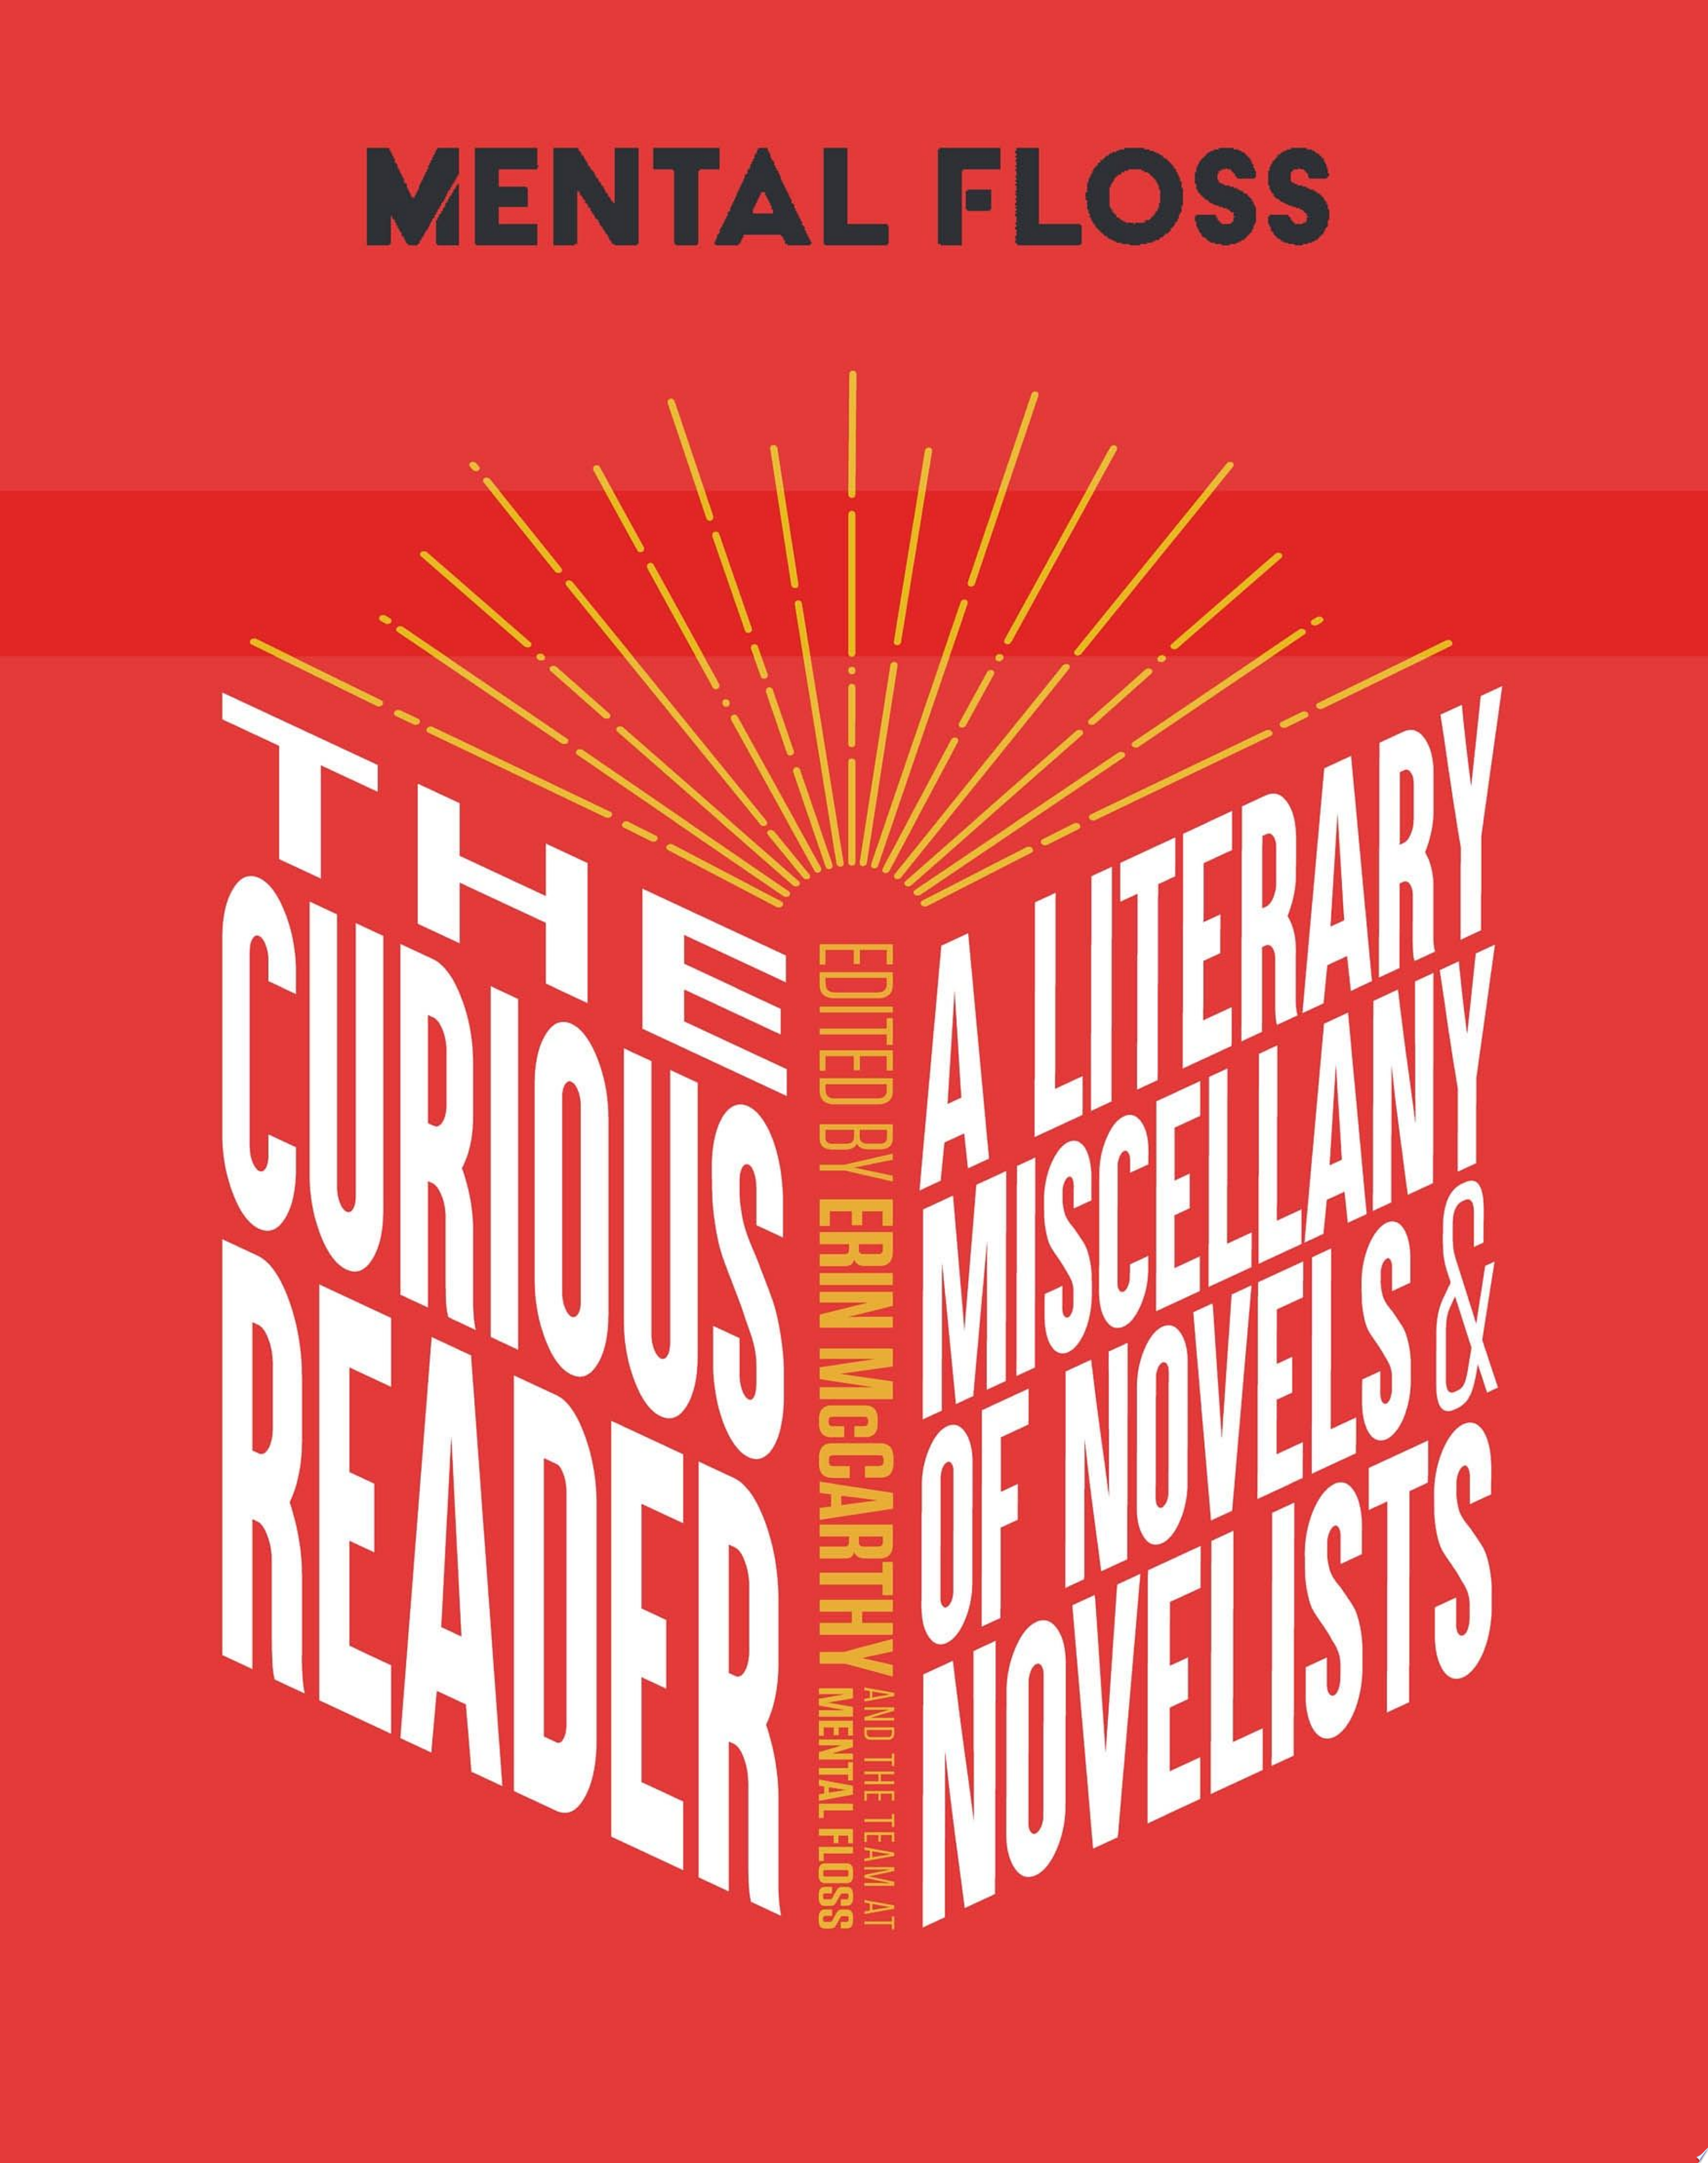 Image for "Mental Floss: The Curious Reader"